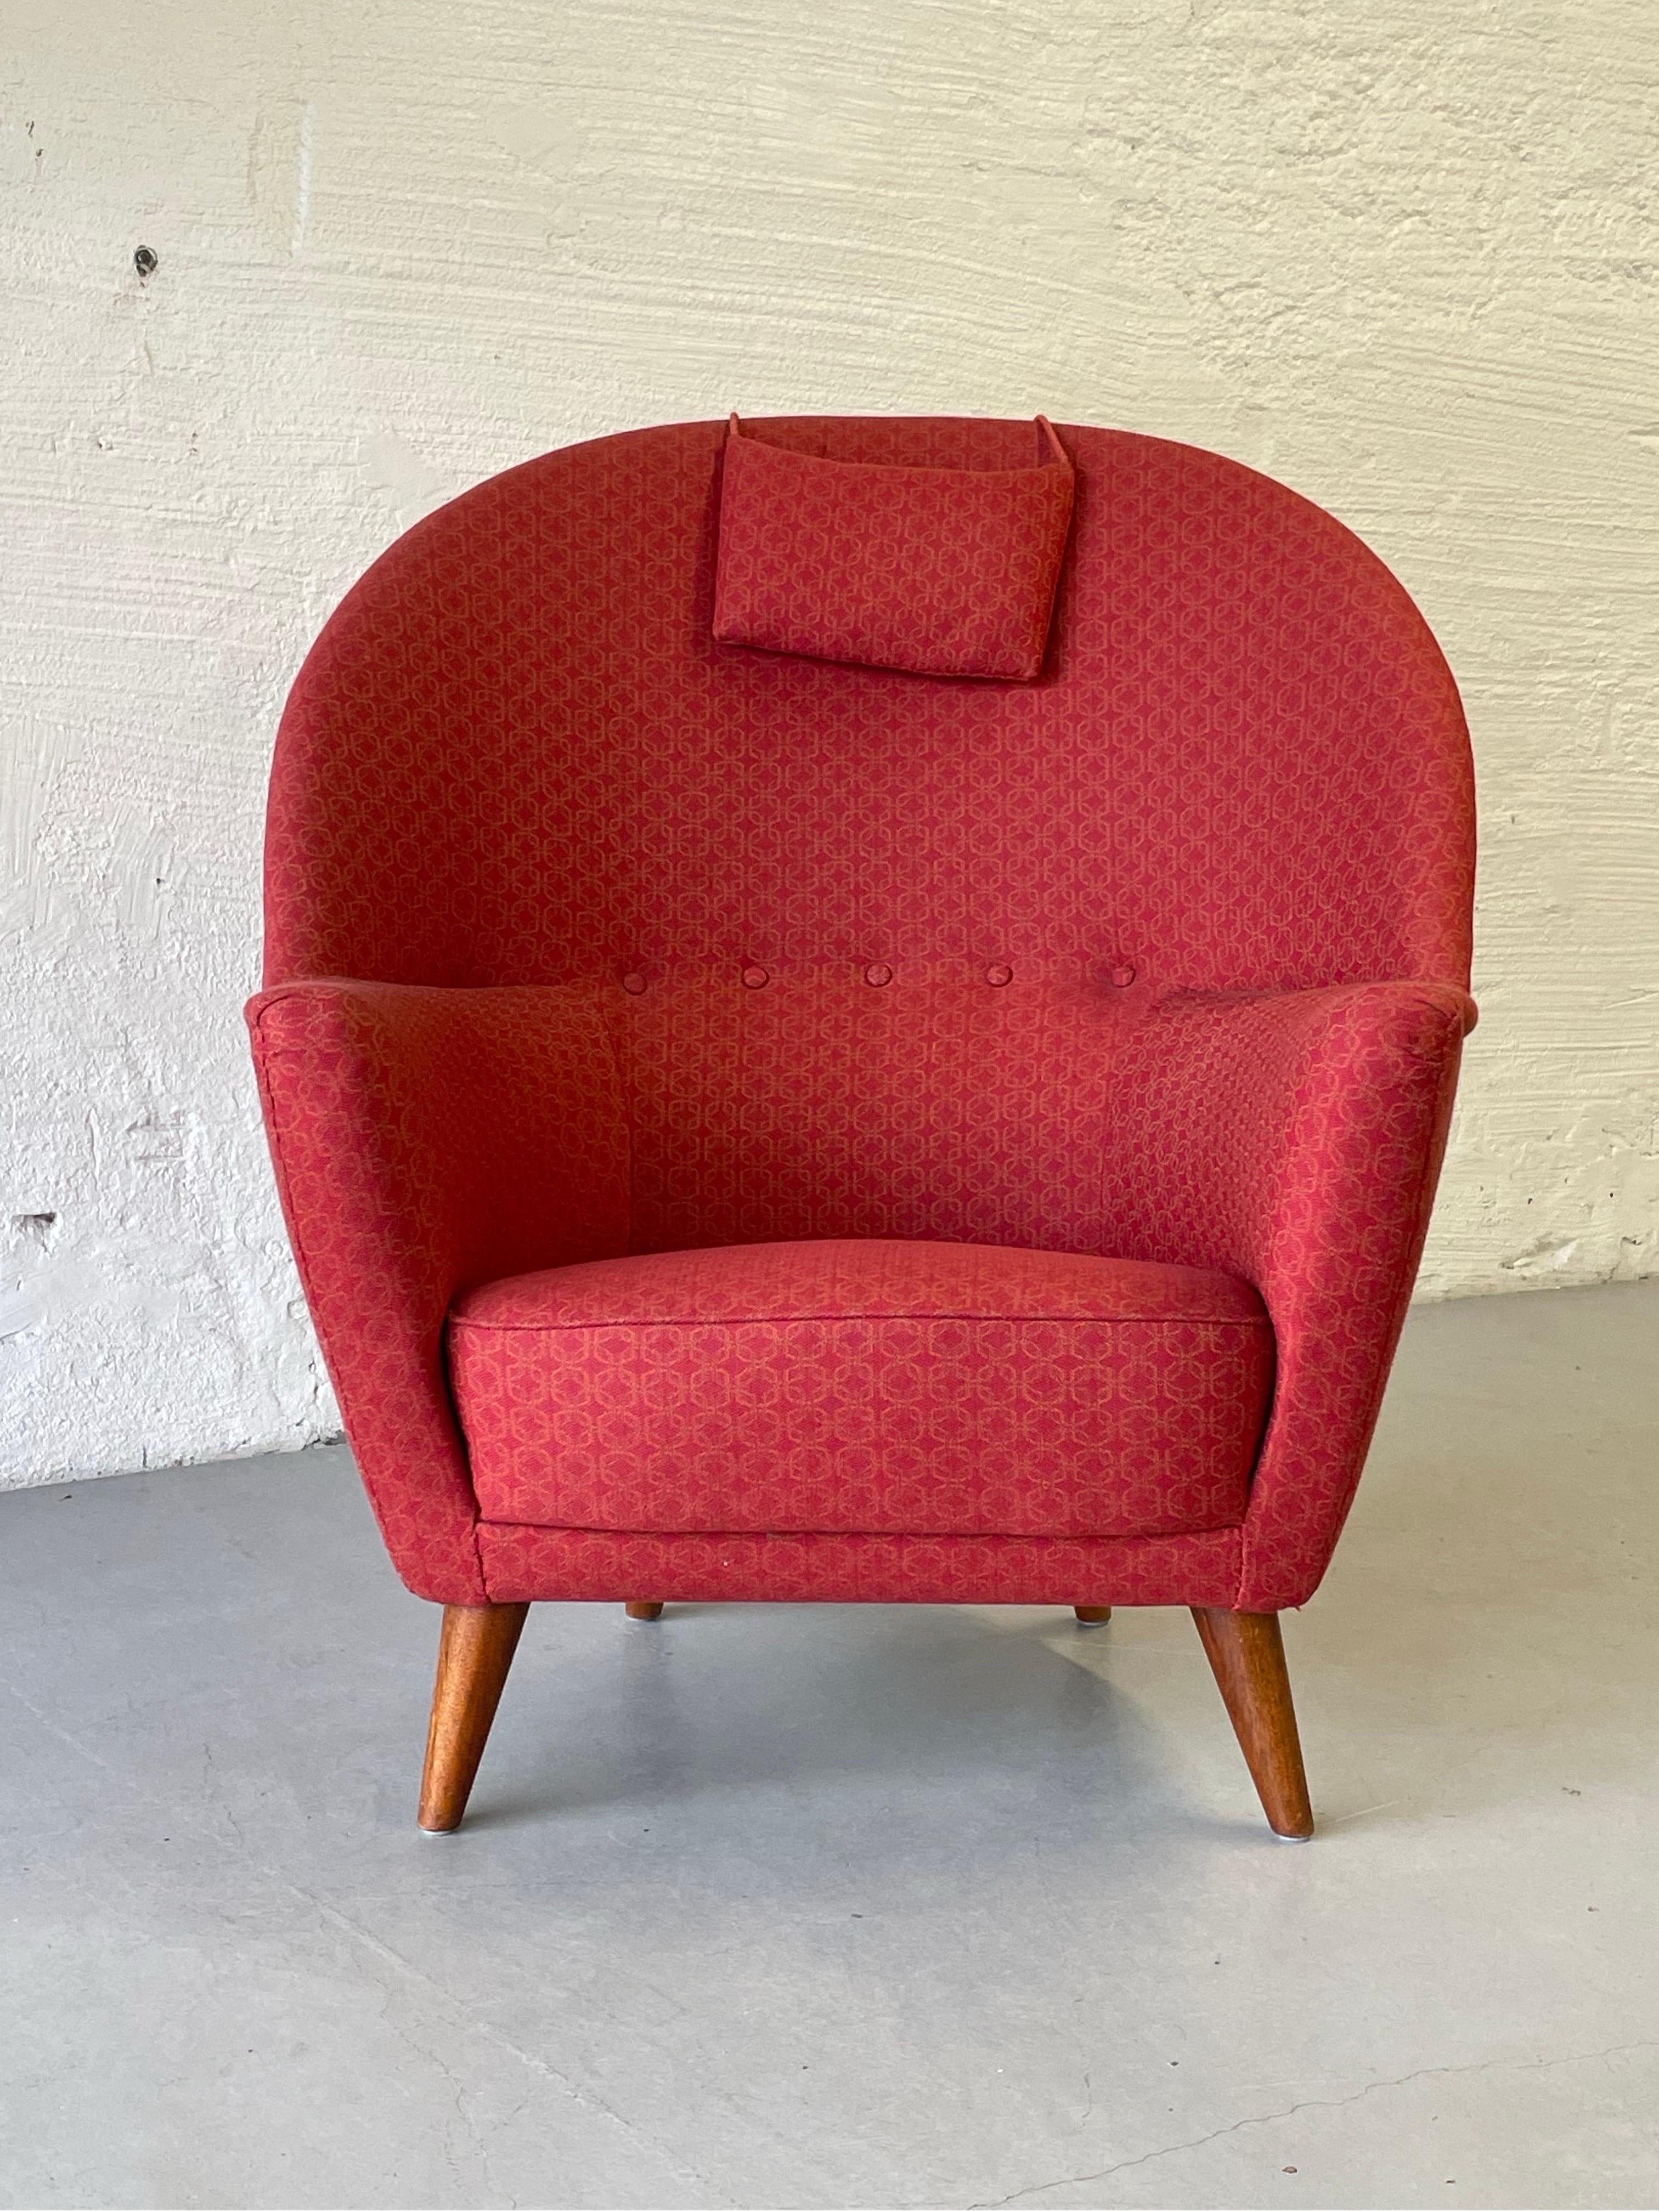 Selling this rare amazing big and cozy chair designed by Fredrik Kayser at Rastad & Relling Tegnekontor in 1952. This chairs is one of a few produced and was only sold at the Rastad & Relling store in Oslo, Norway.
It is in very good condition and